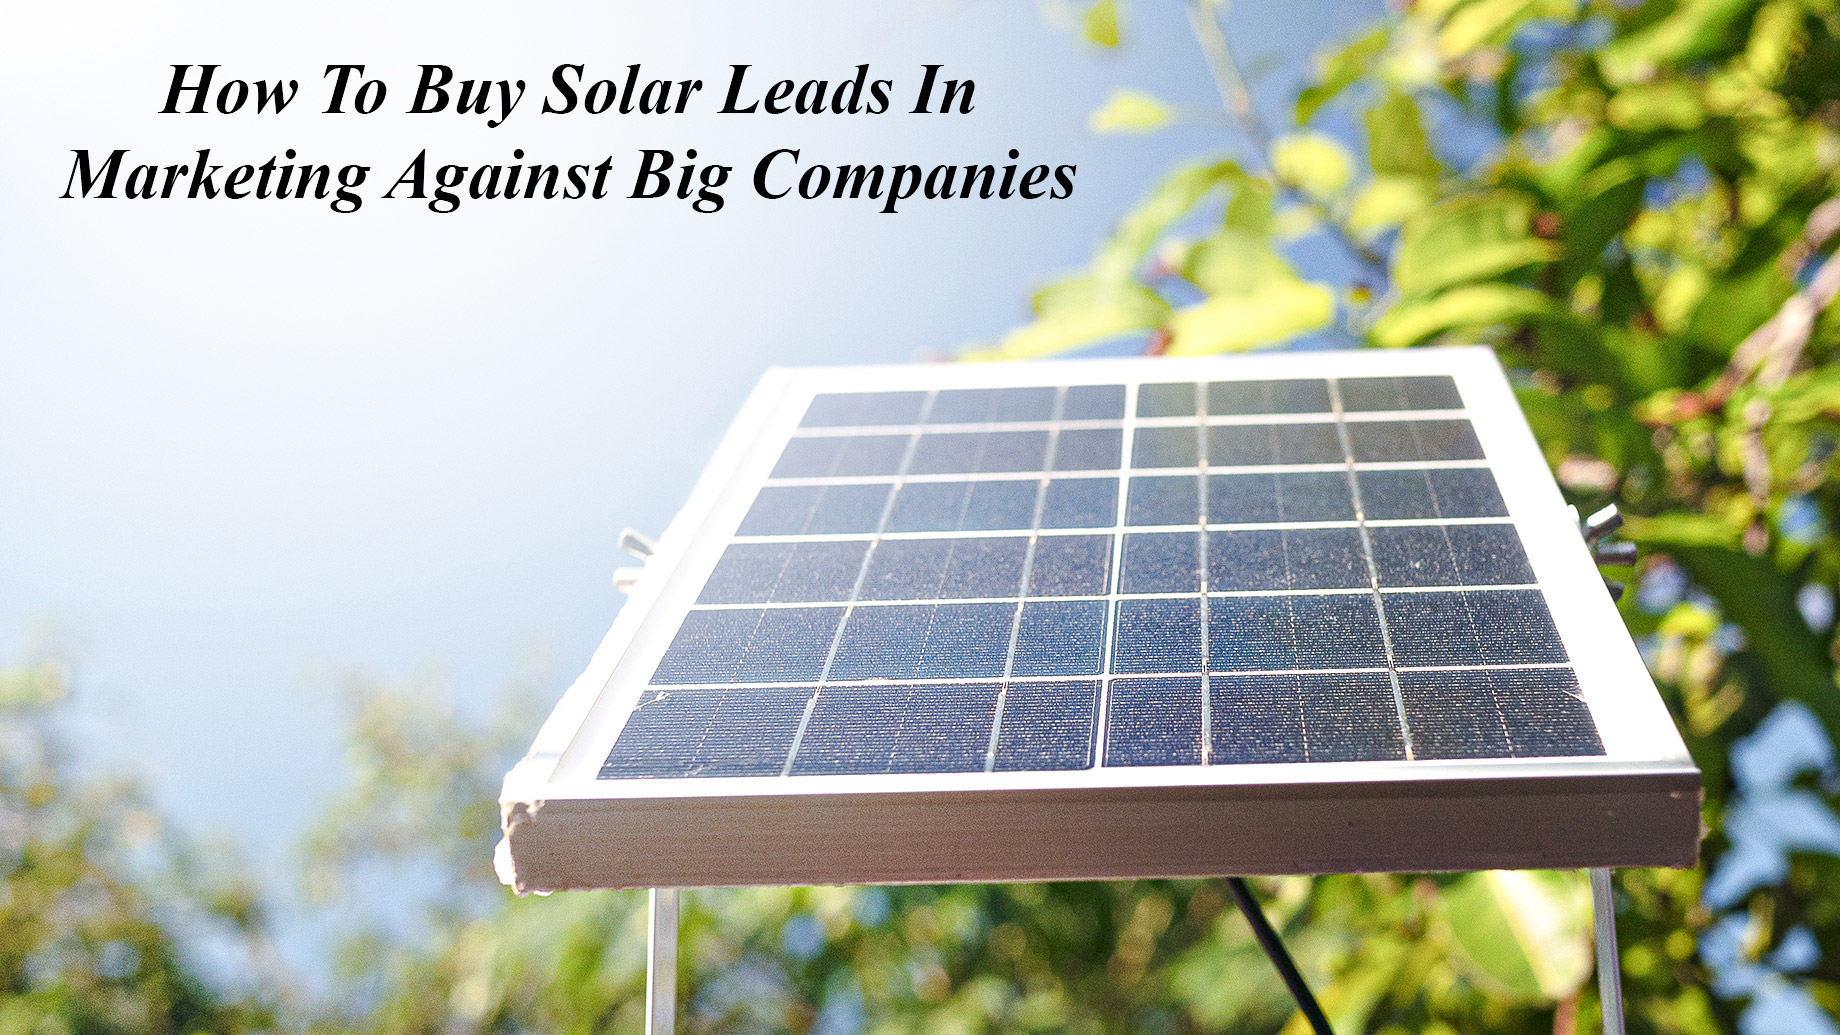 How To Buy Solar Leads In Marketing Against Big Companies